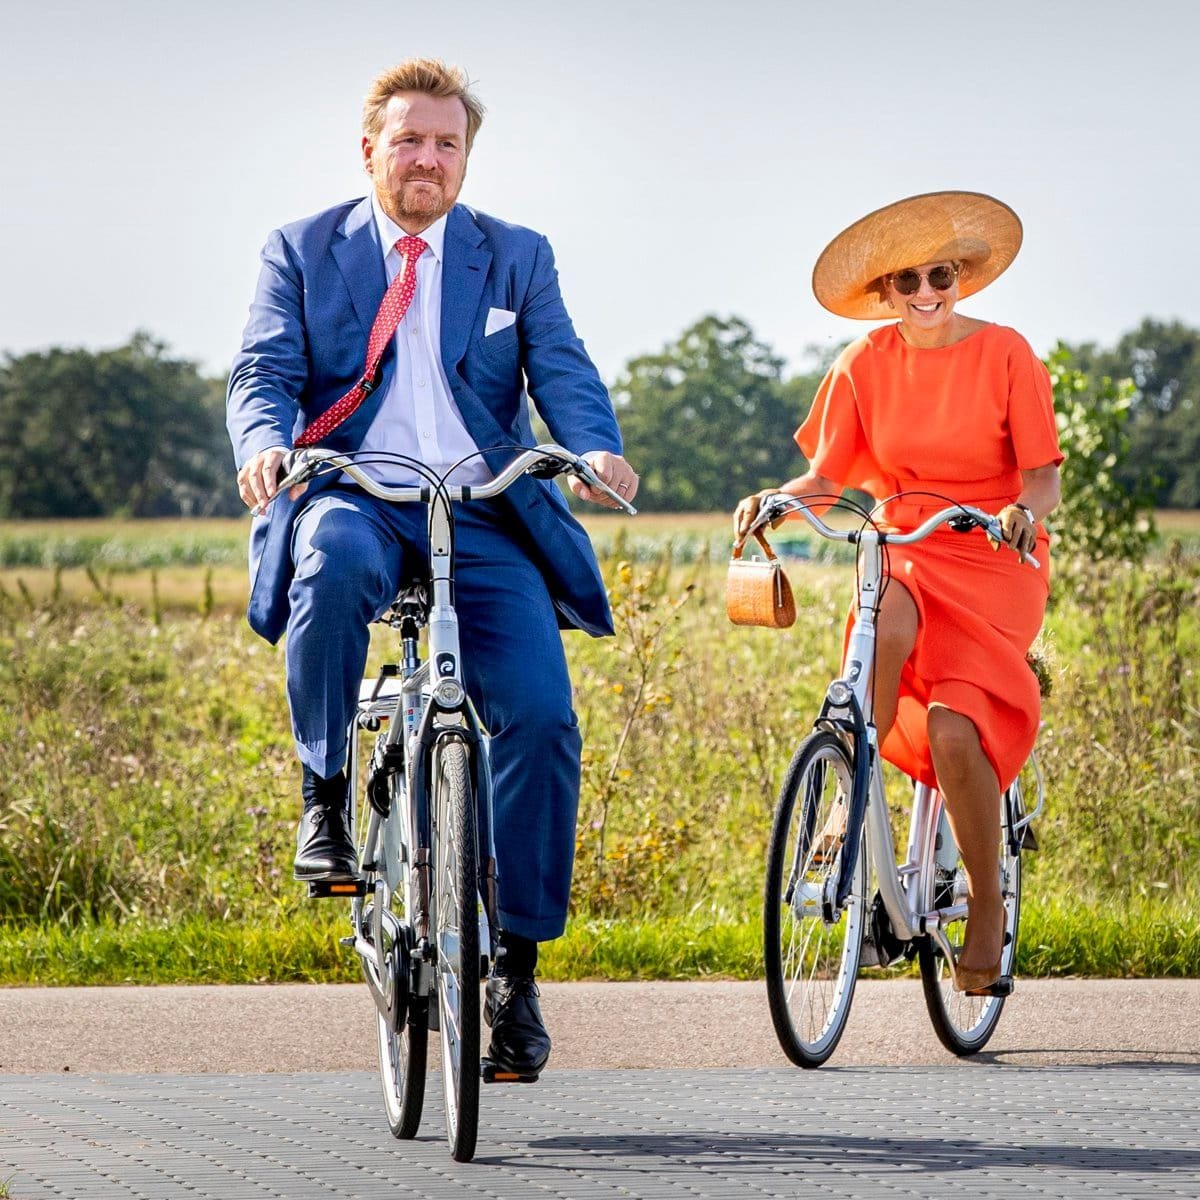 A dress and heels did not stop Queen Maxima from bike riding in Ooststellingswerf with King Willem-Alexander in 2020.